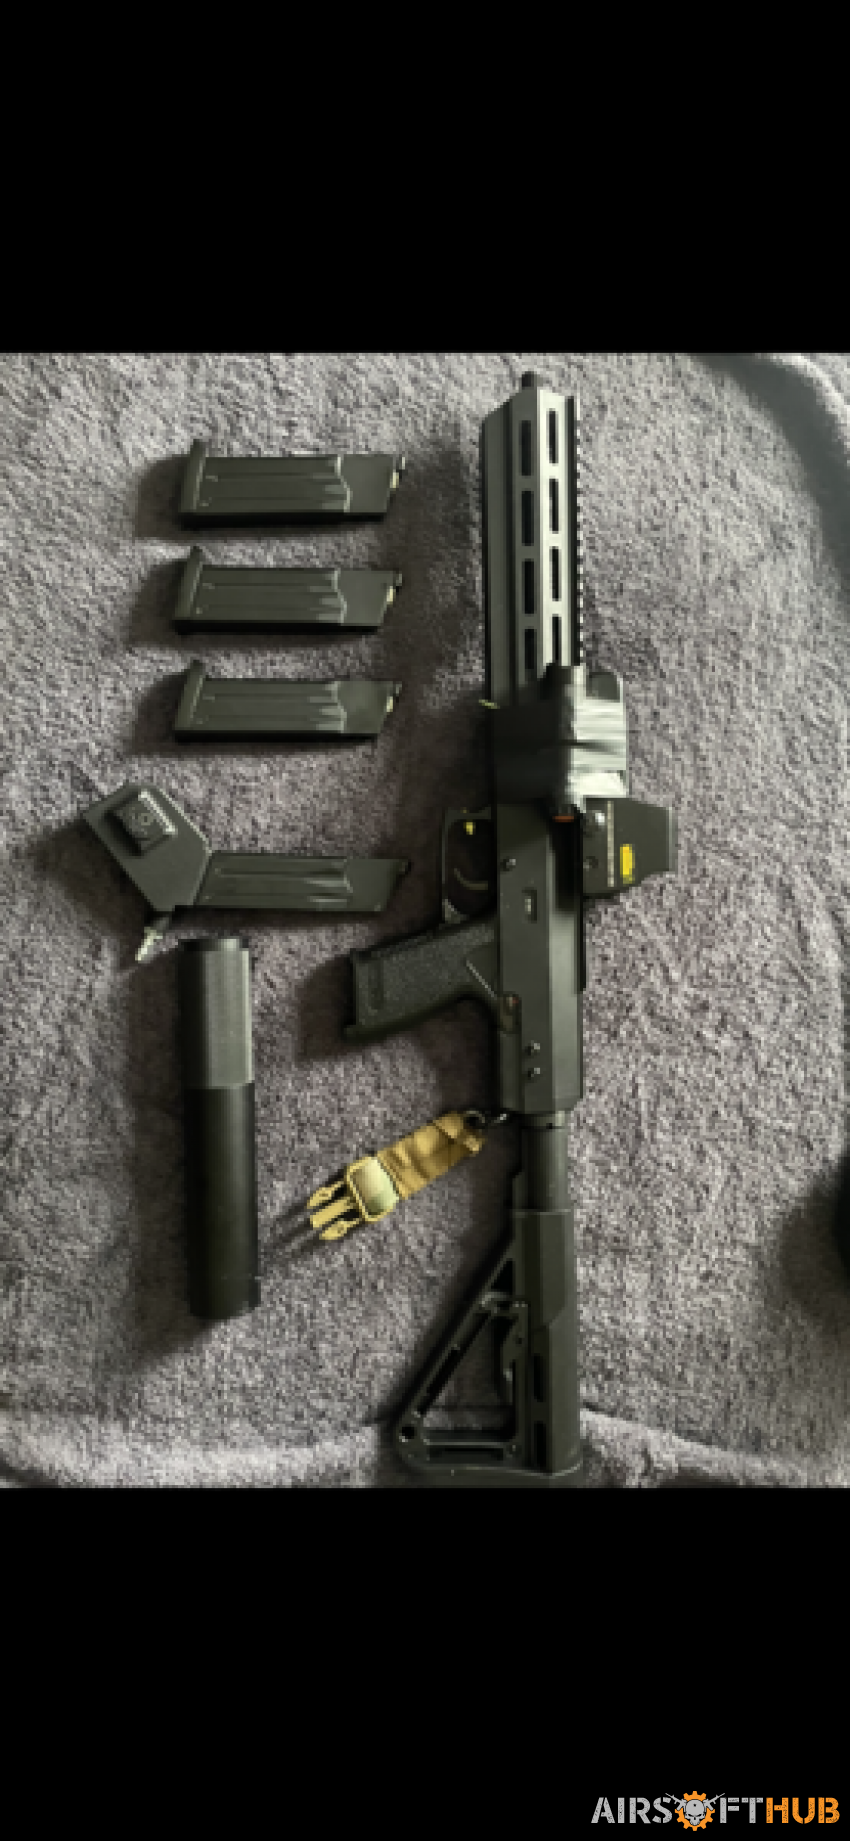 SSX 303 bundle - Used airsoft equipment